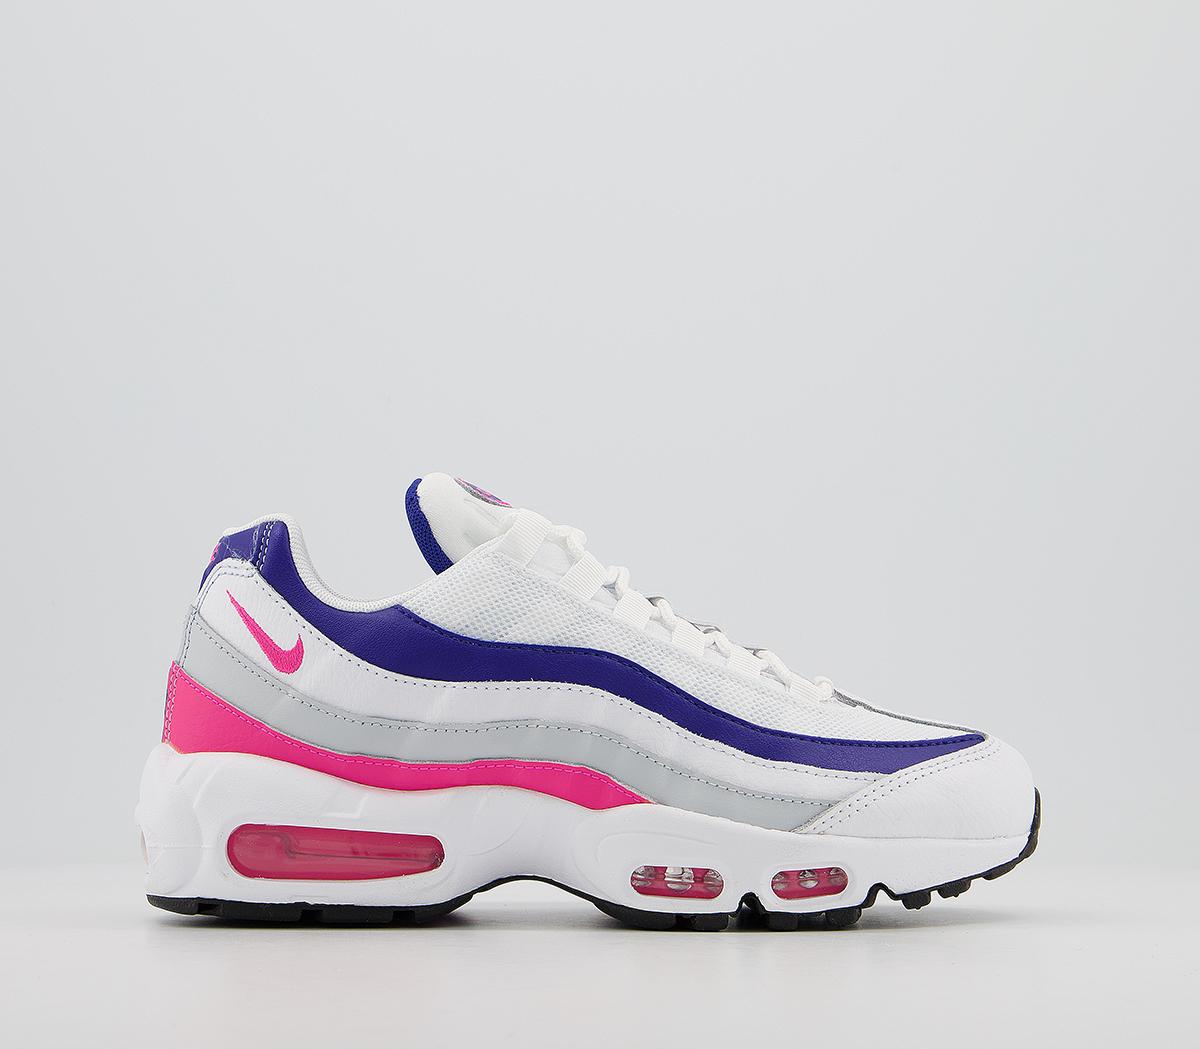 regeling Malen Ernest Shackleton Nike Air Max 95 Trainers White Hyper Pink Concord Pure Platinum - Unisex  Sports